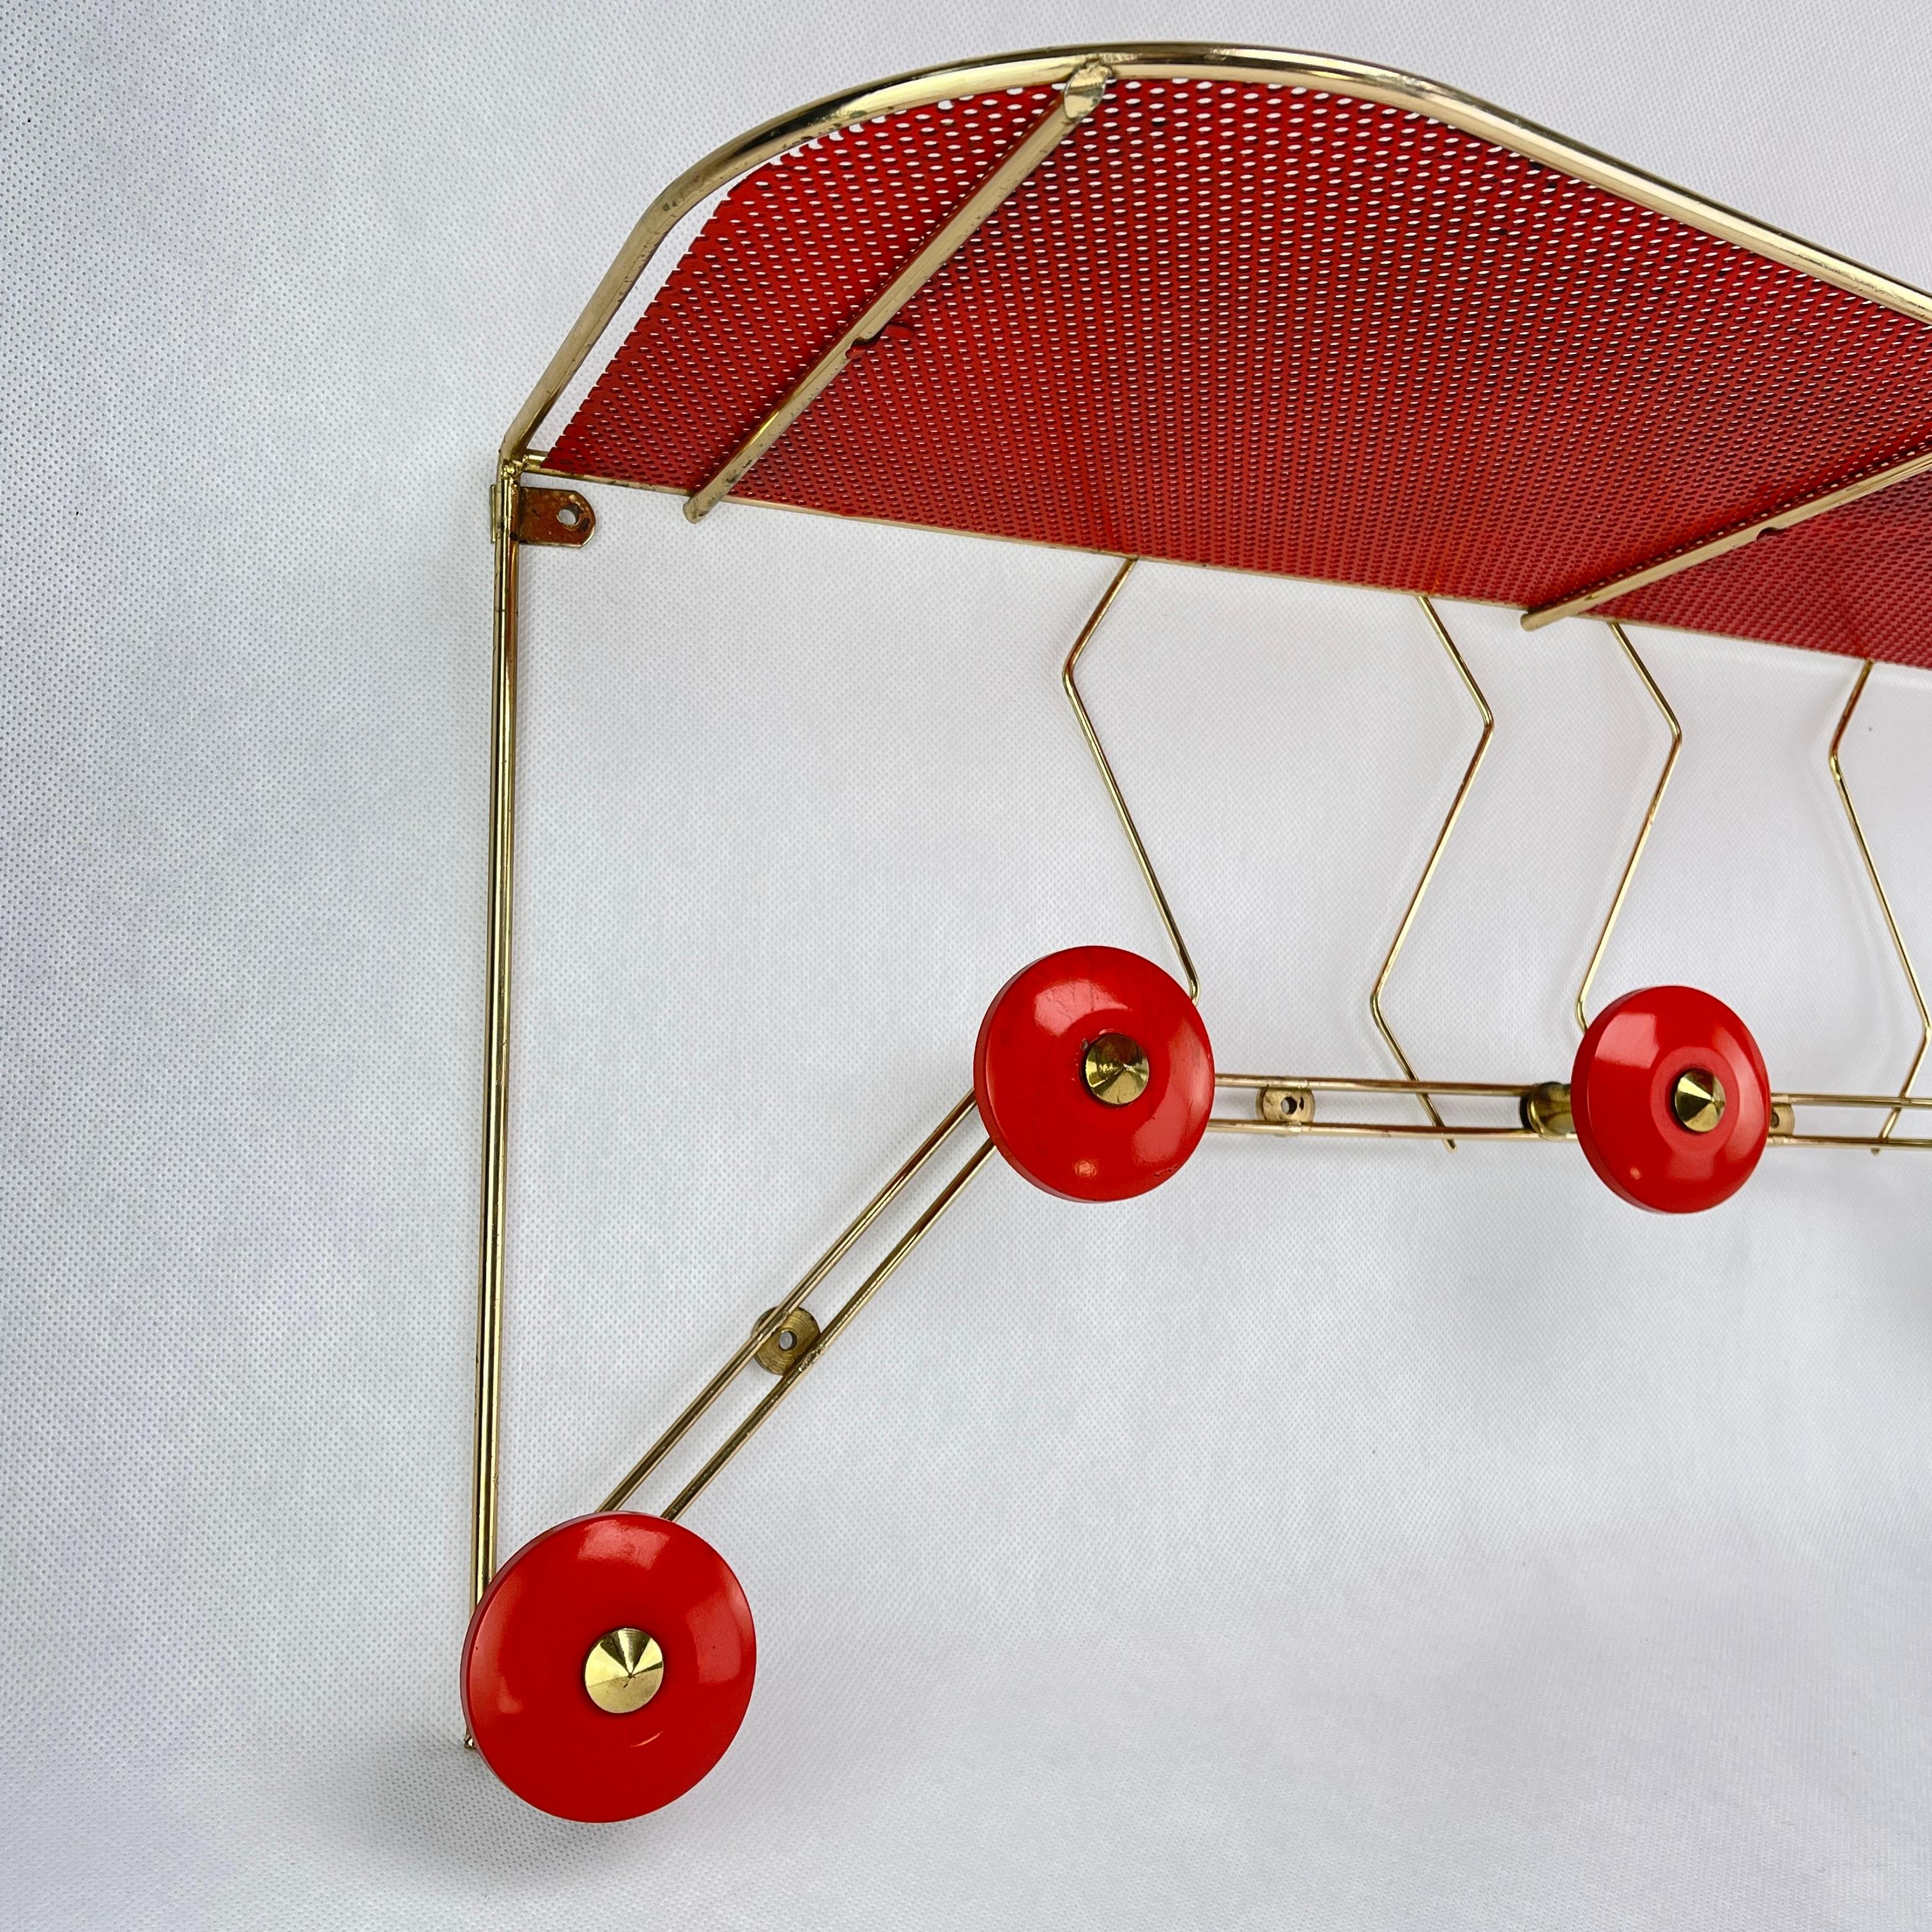 French Vintage Rockabilly Midcentury Wall Coat Rack, 1950s